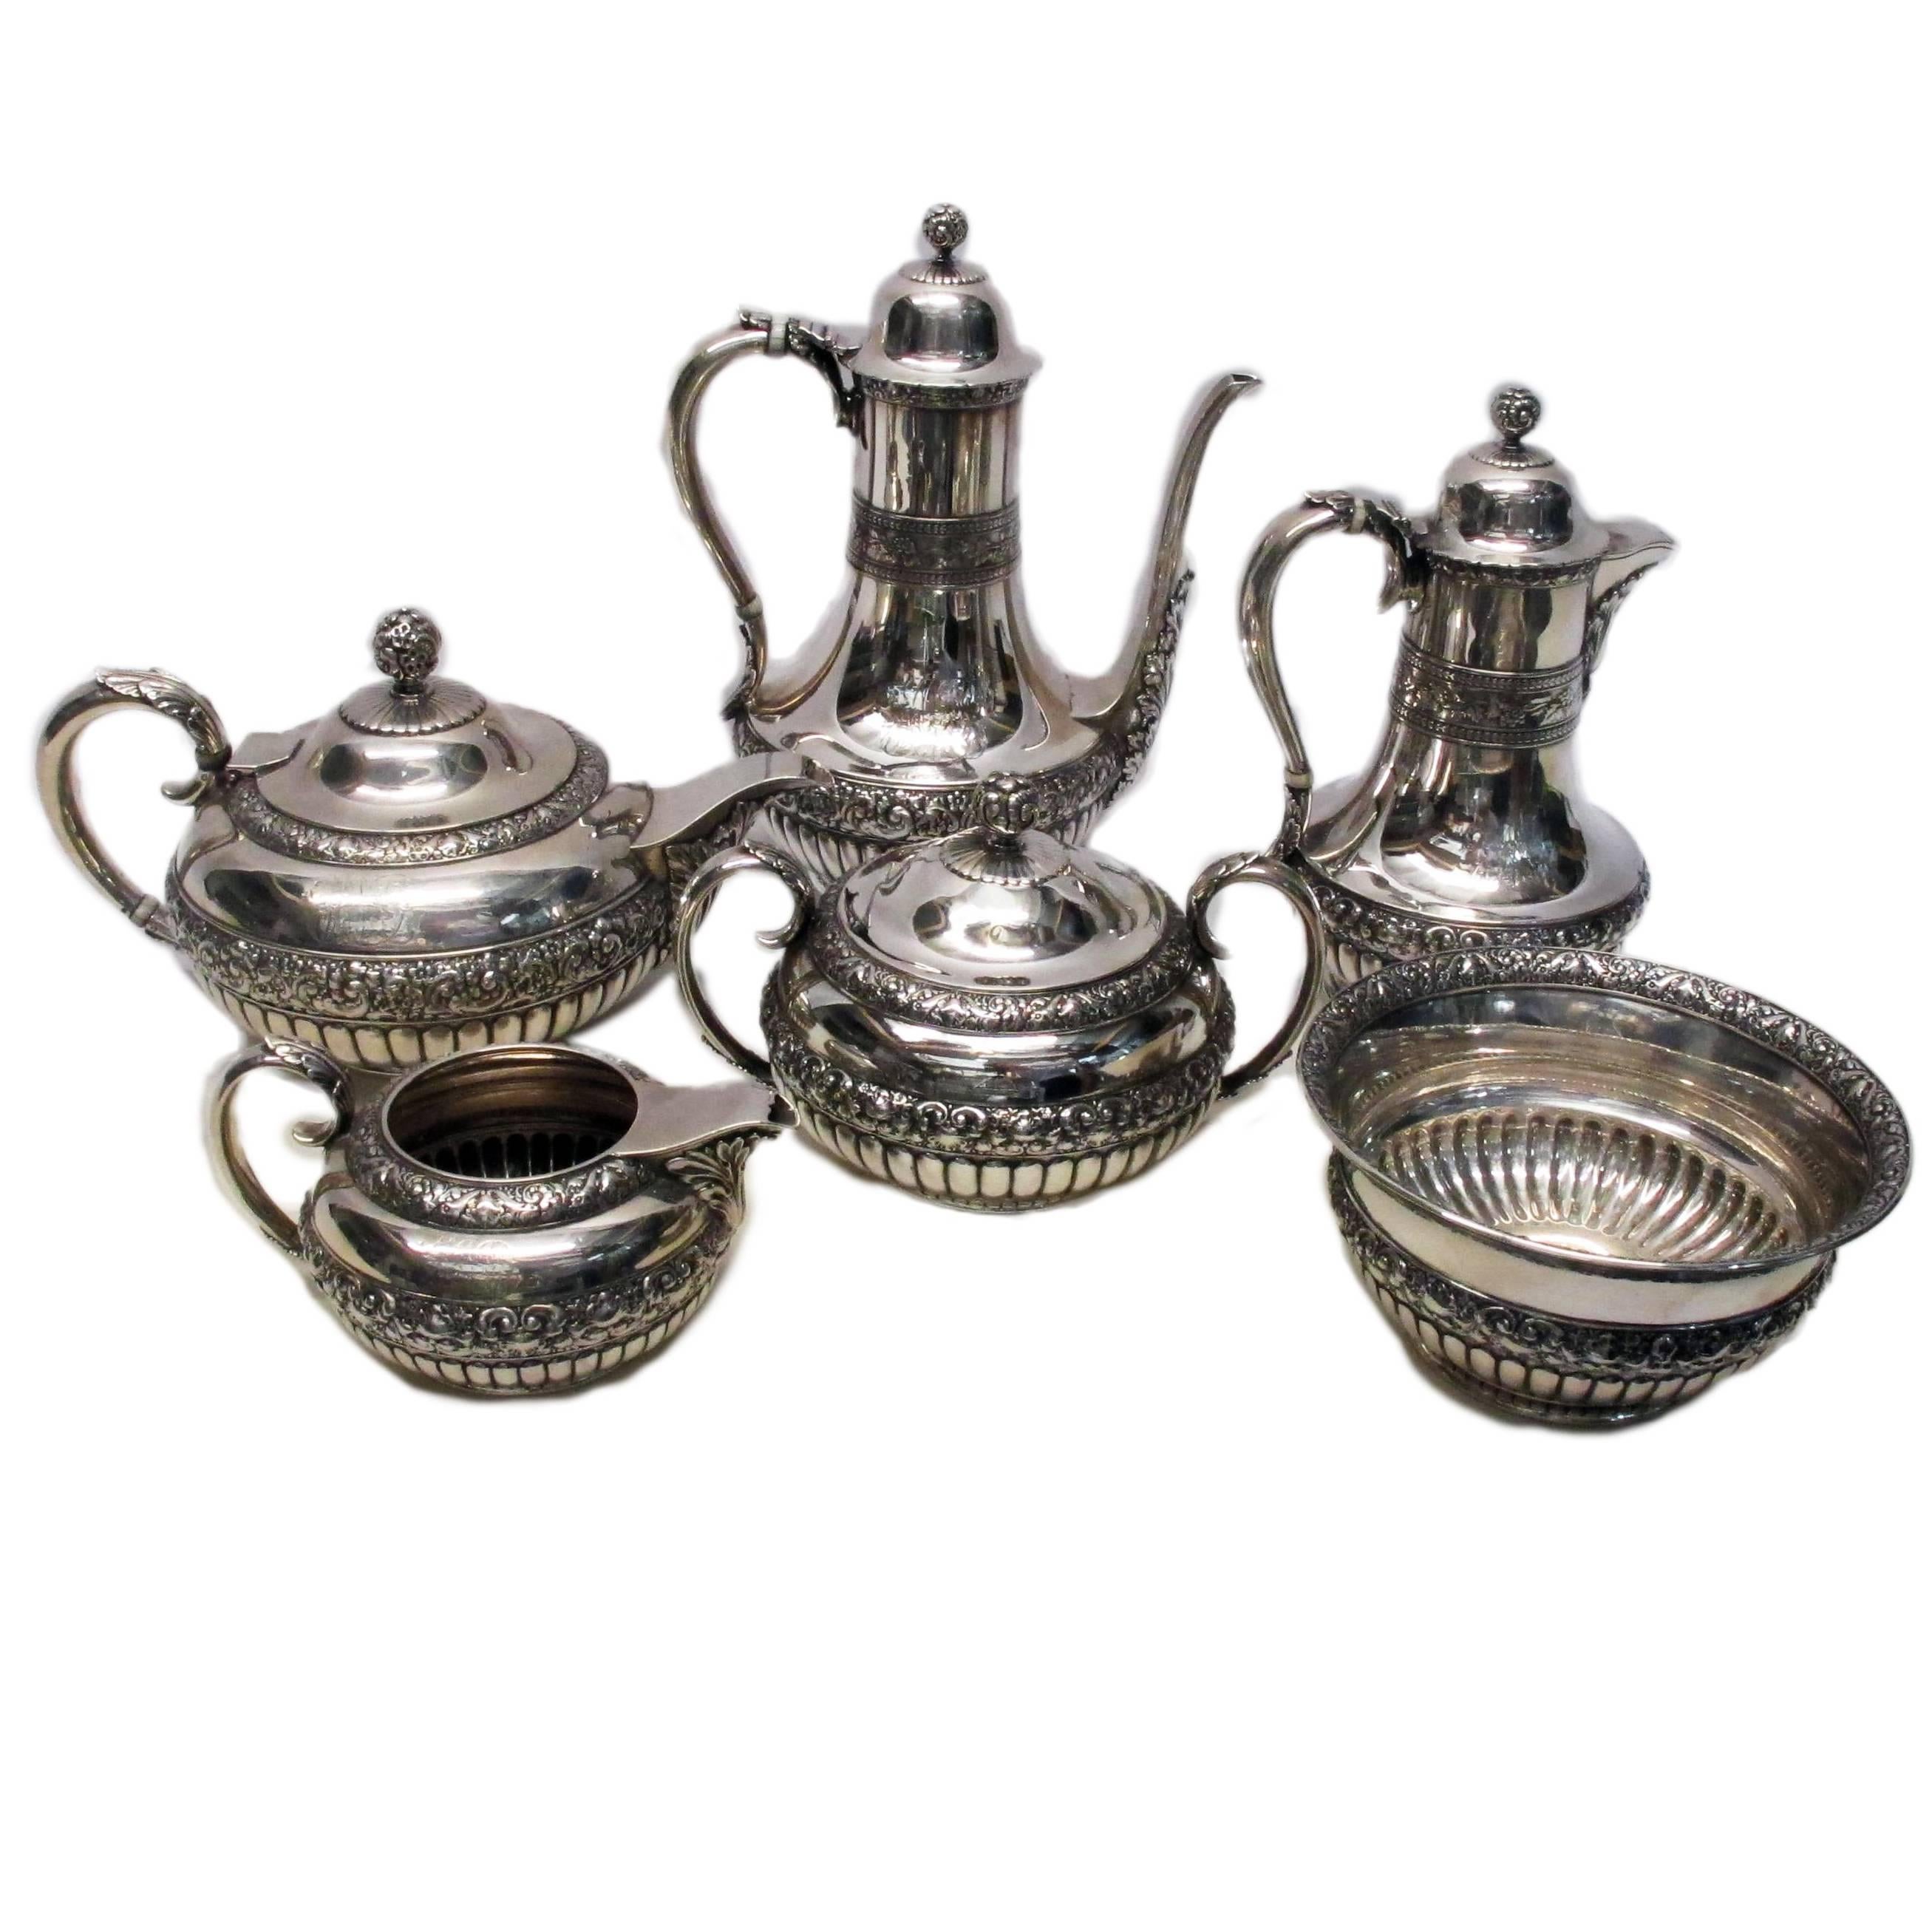 Tiffany & Co. Sterling Silver Six-Piece Tea and Coffee Service, circa 1870 For Sale